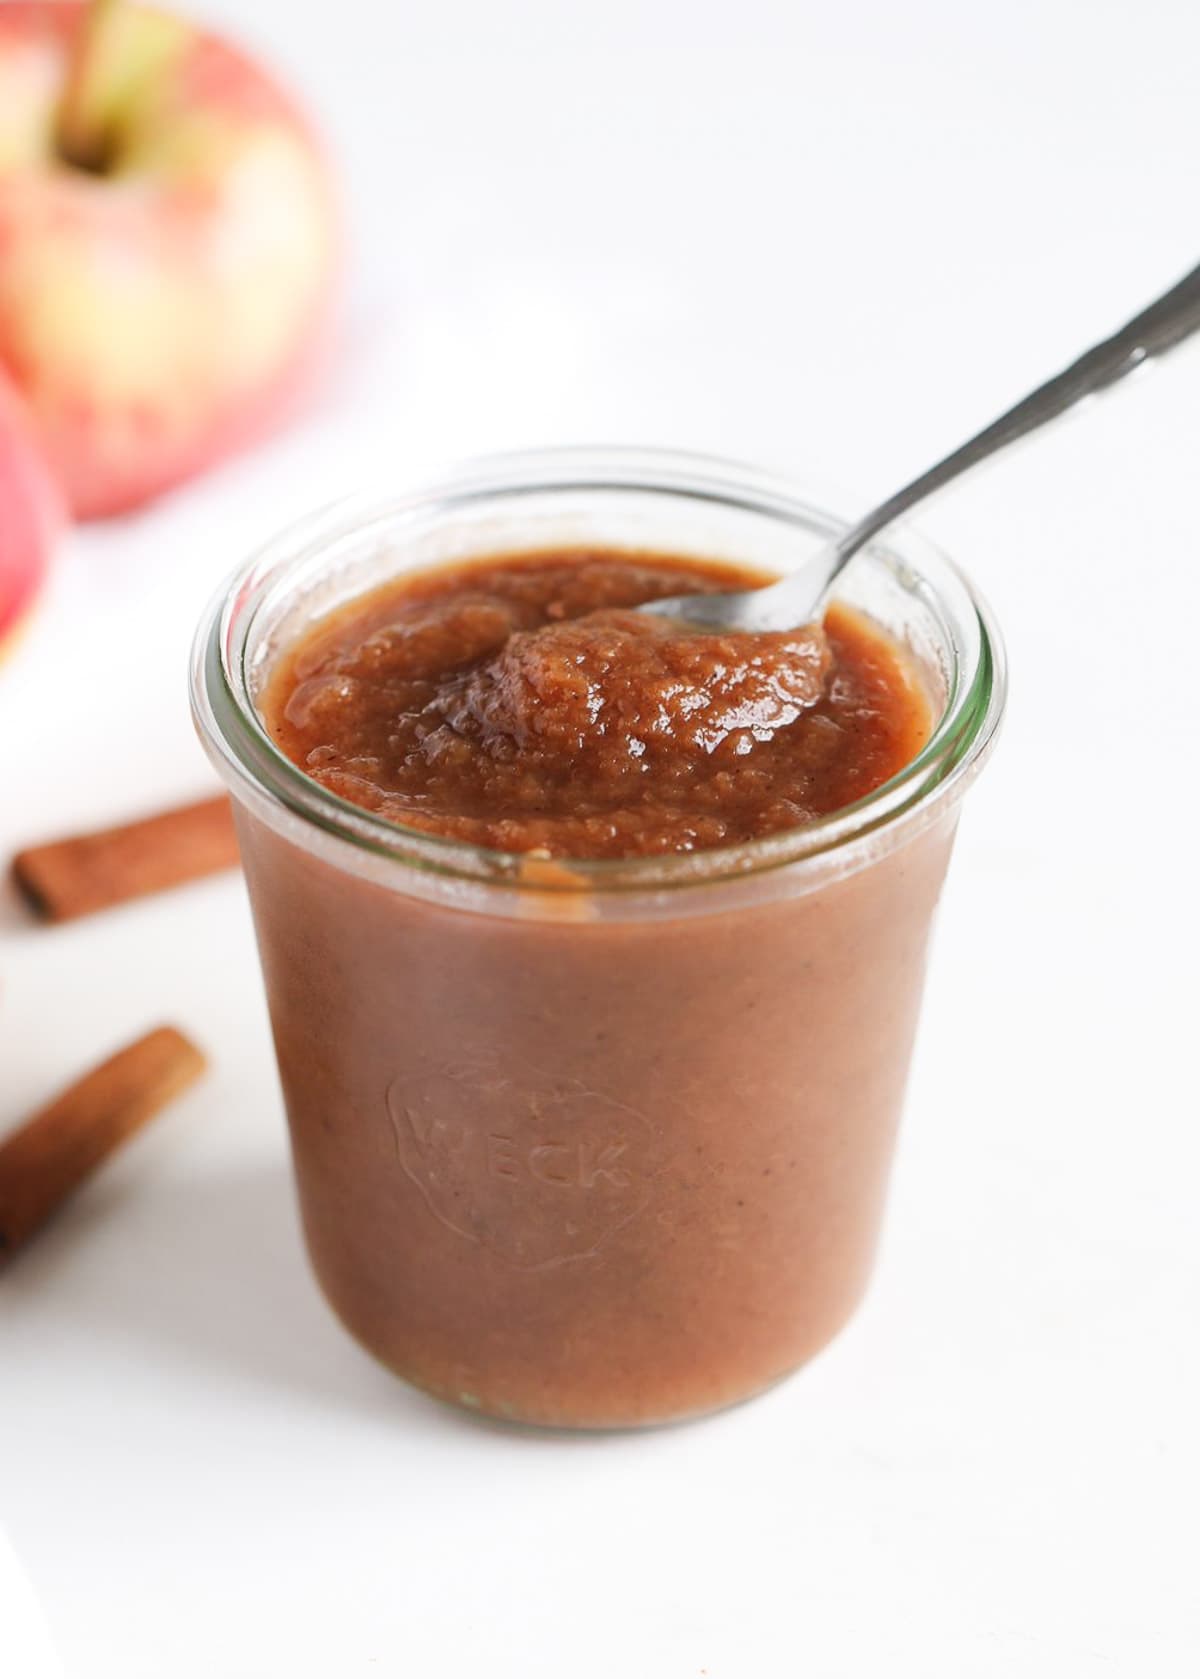 Apple butter in a jar with spoon.